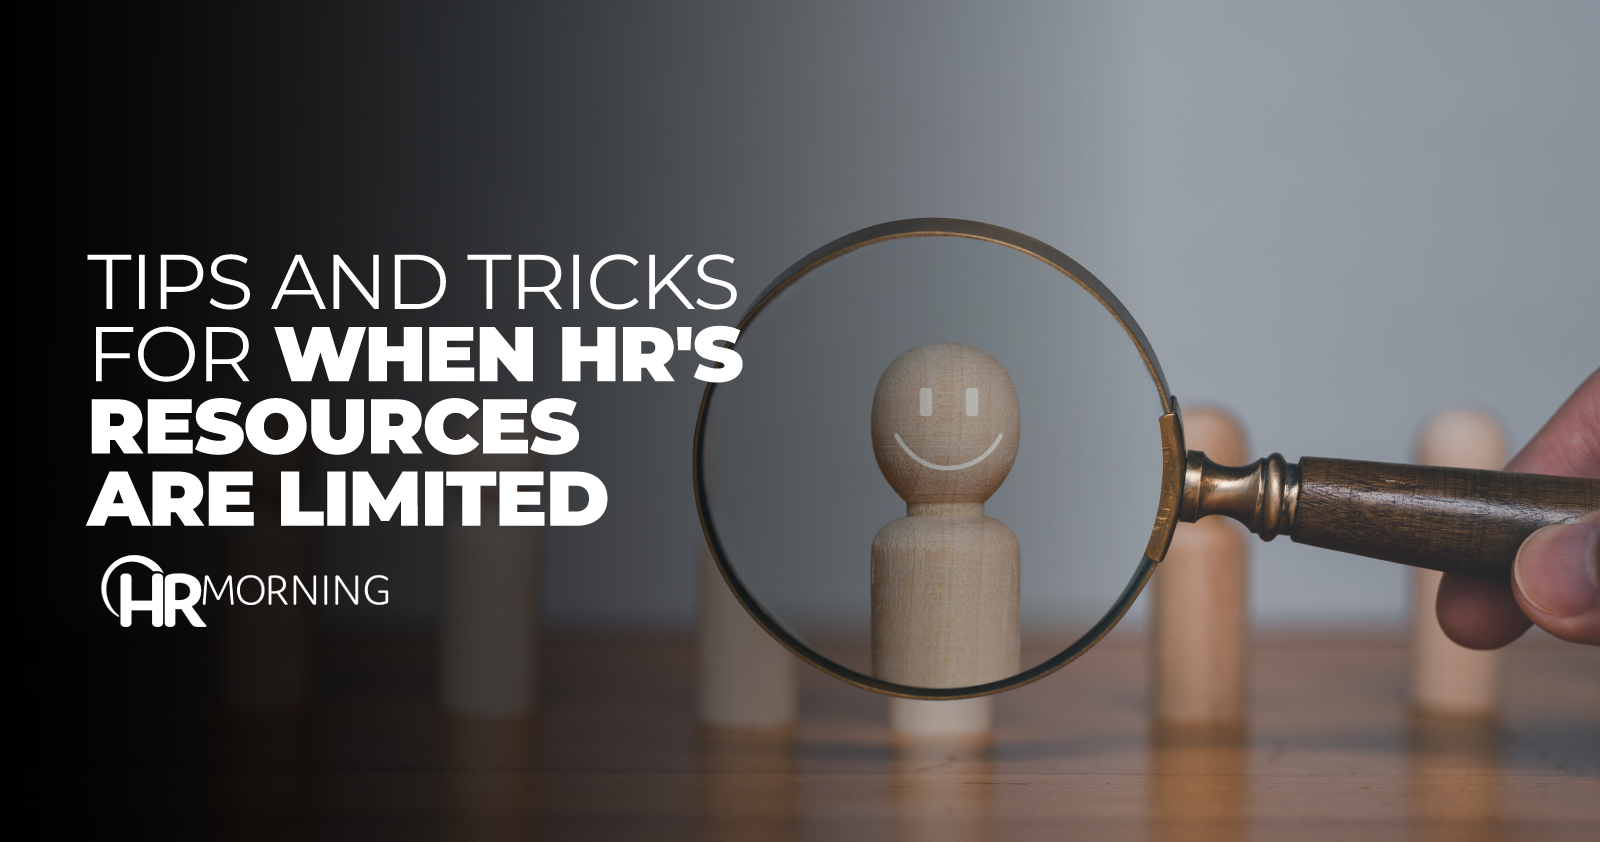 Tips And Tricks For When HR's Resources Are Limited